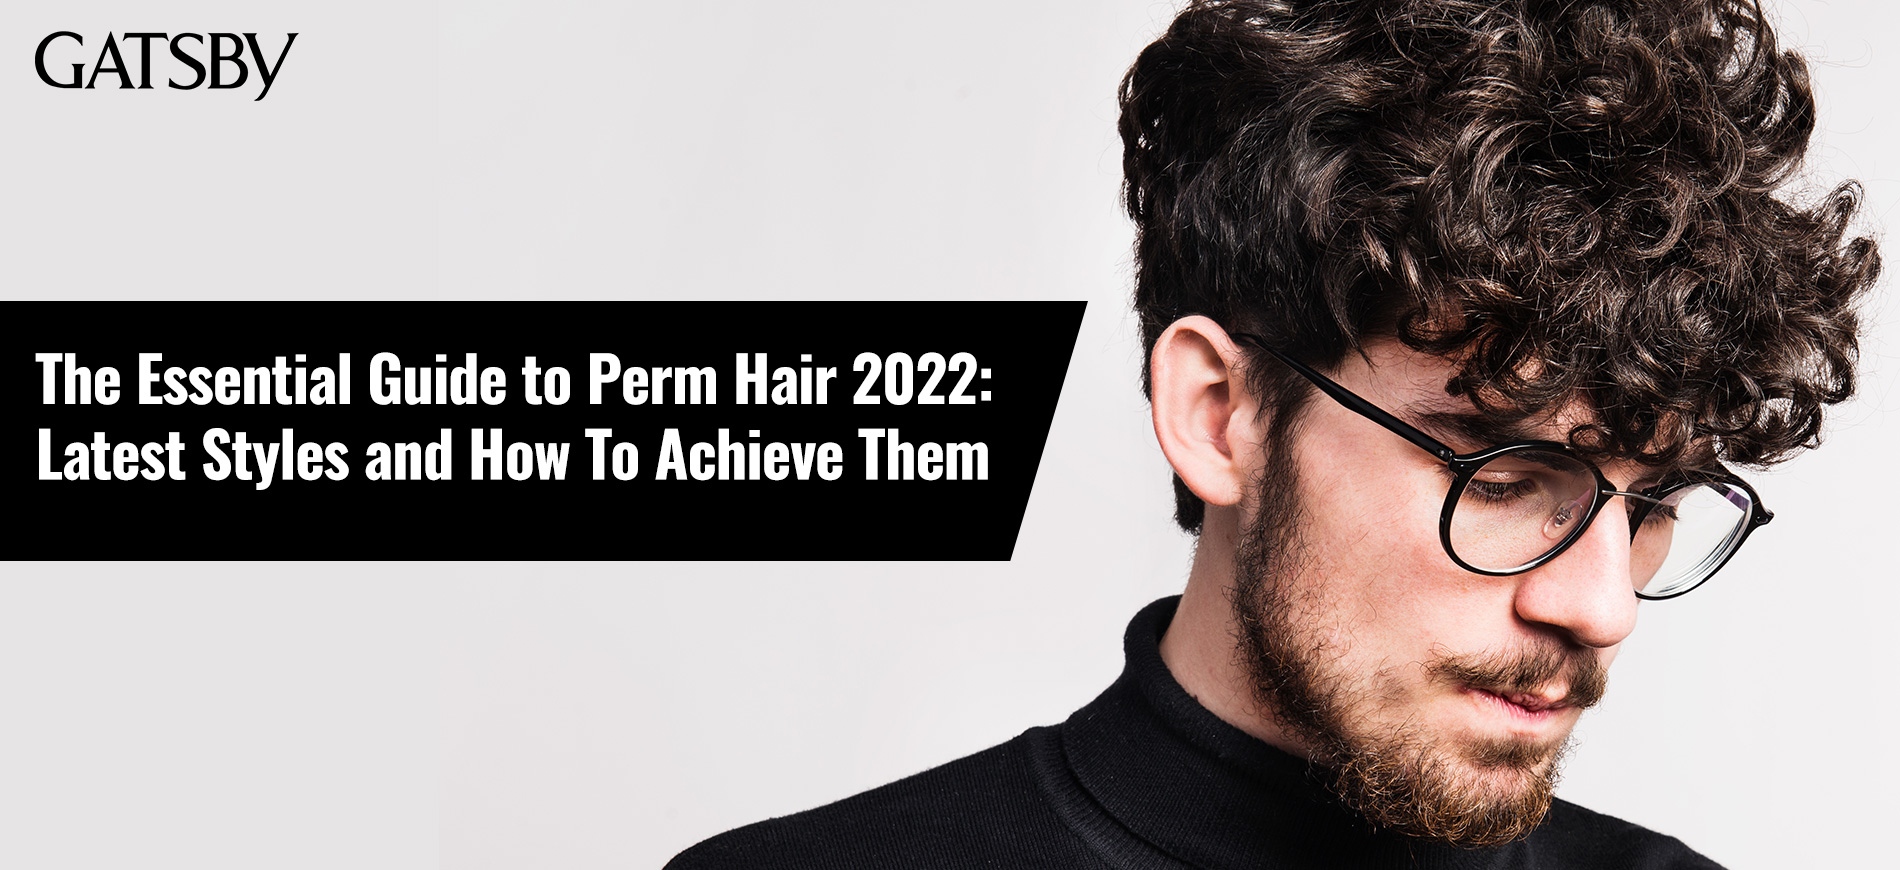 The Essential Guide to Perm Hair 2022: Latest Styles and How To Achieve Them